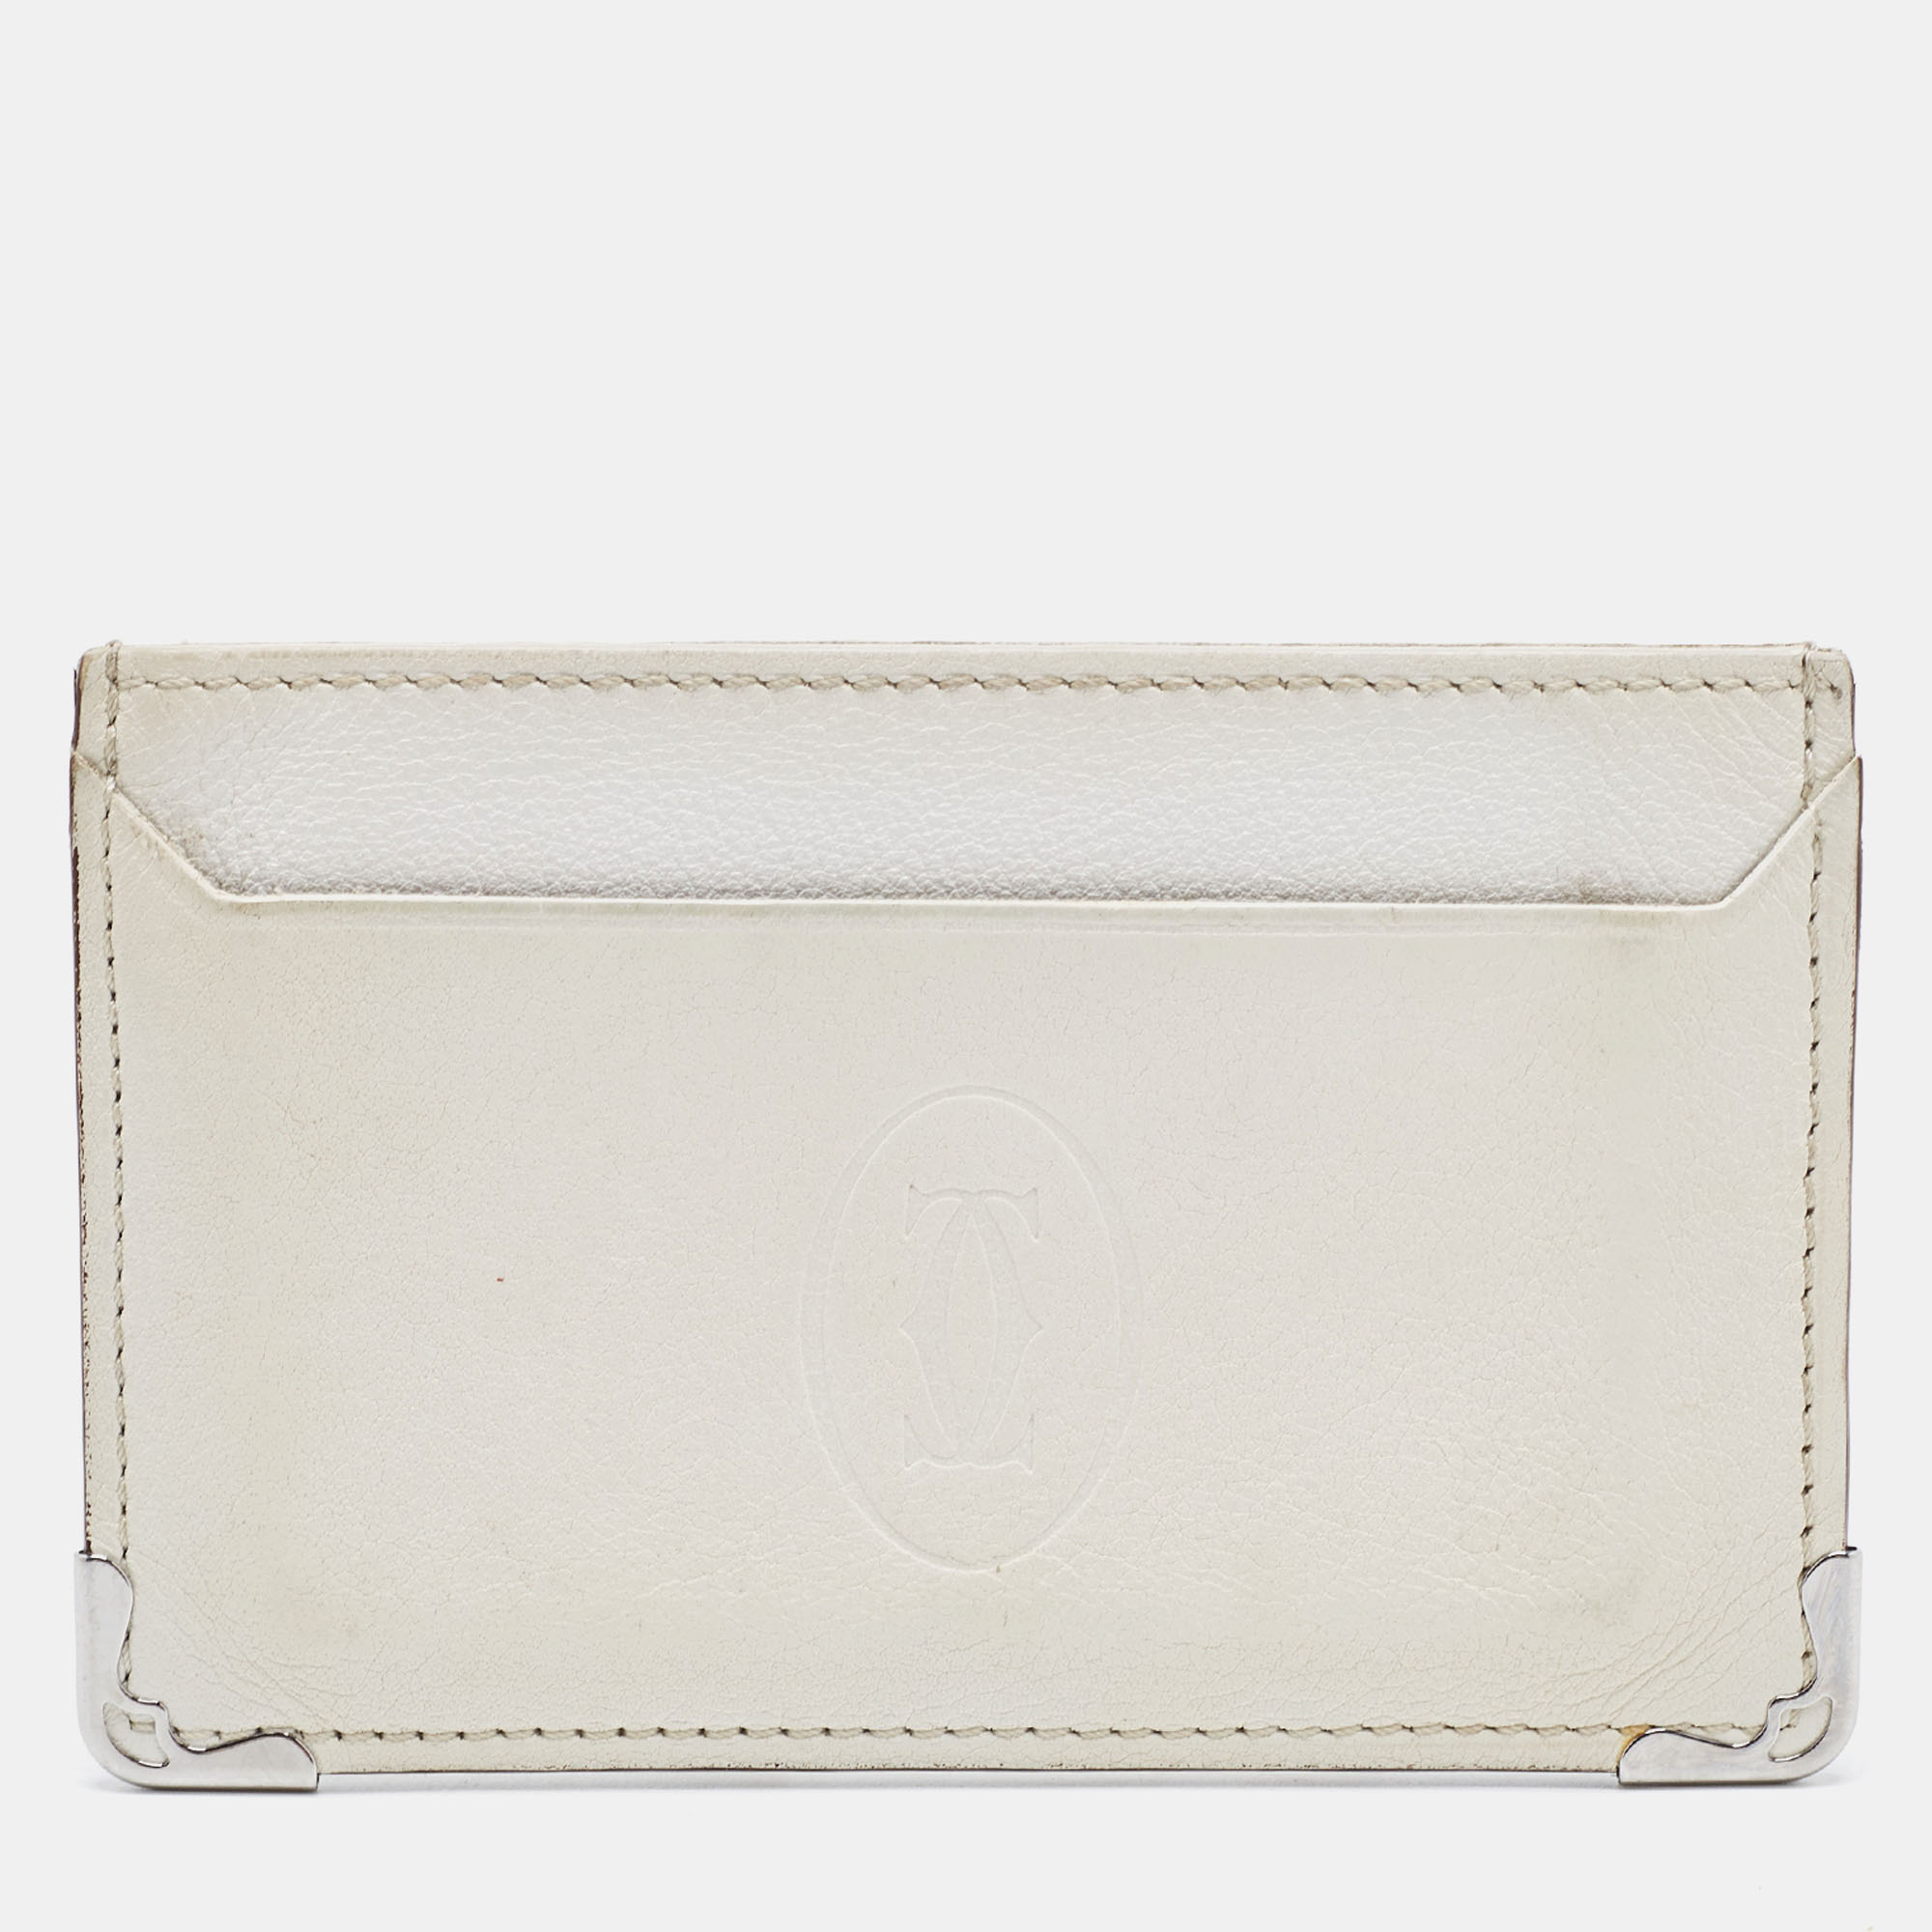 Complete your collection of accessories with this stunning Cartier creation. Crafted from leather in a timeless white hue the cardholder is styled with multiple slots.